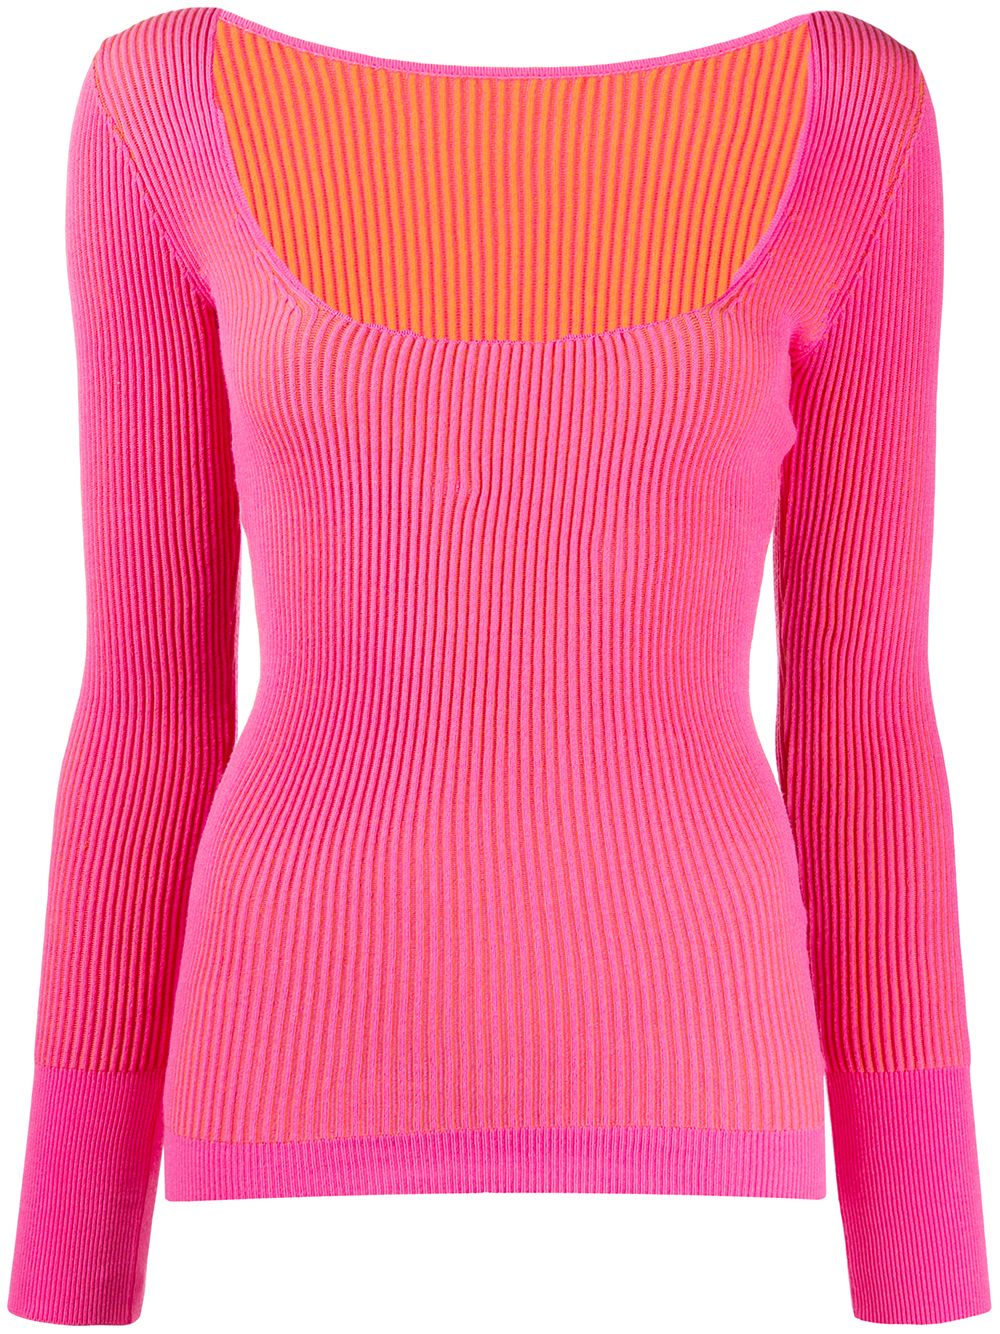 JACQUEMUS LA MAILLE ROSA KNITTED TOP